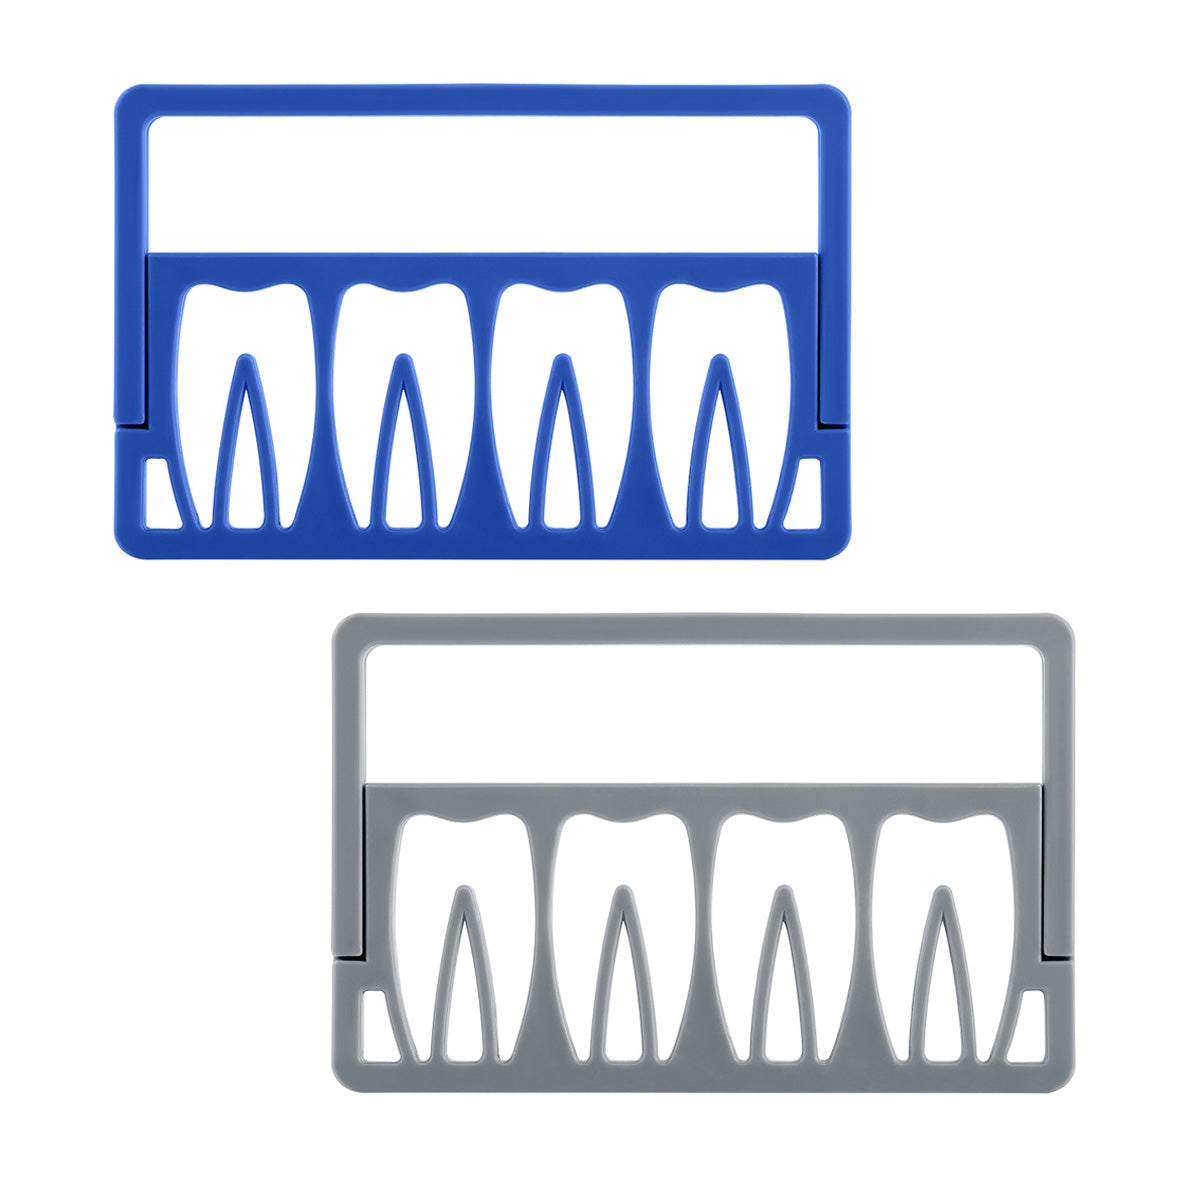 8 Holes Endodontic Root Canal File Drills Placement Disinfection Rack Stand - pairaydental.com